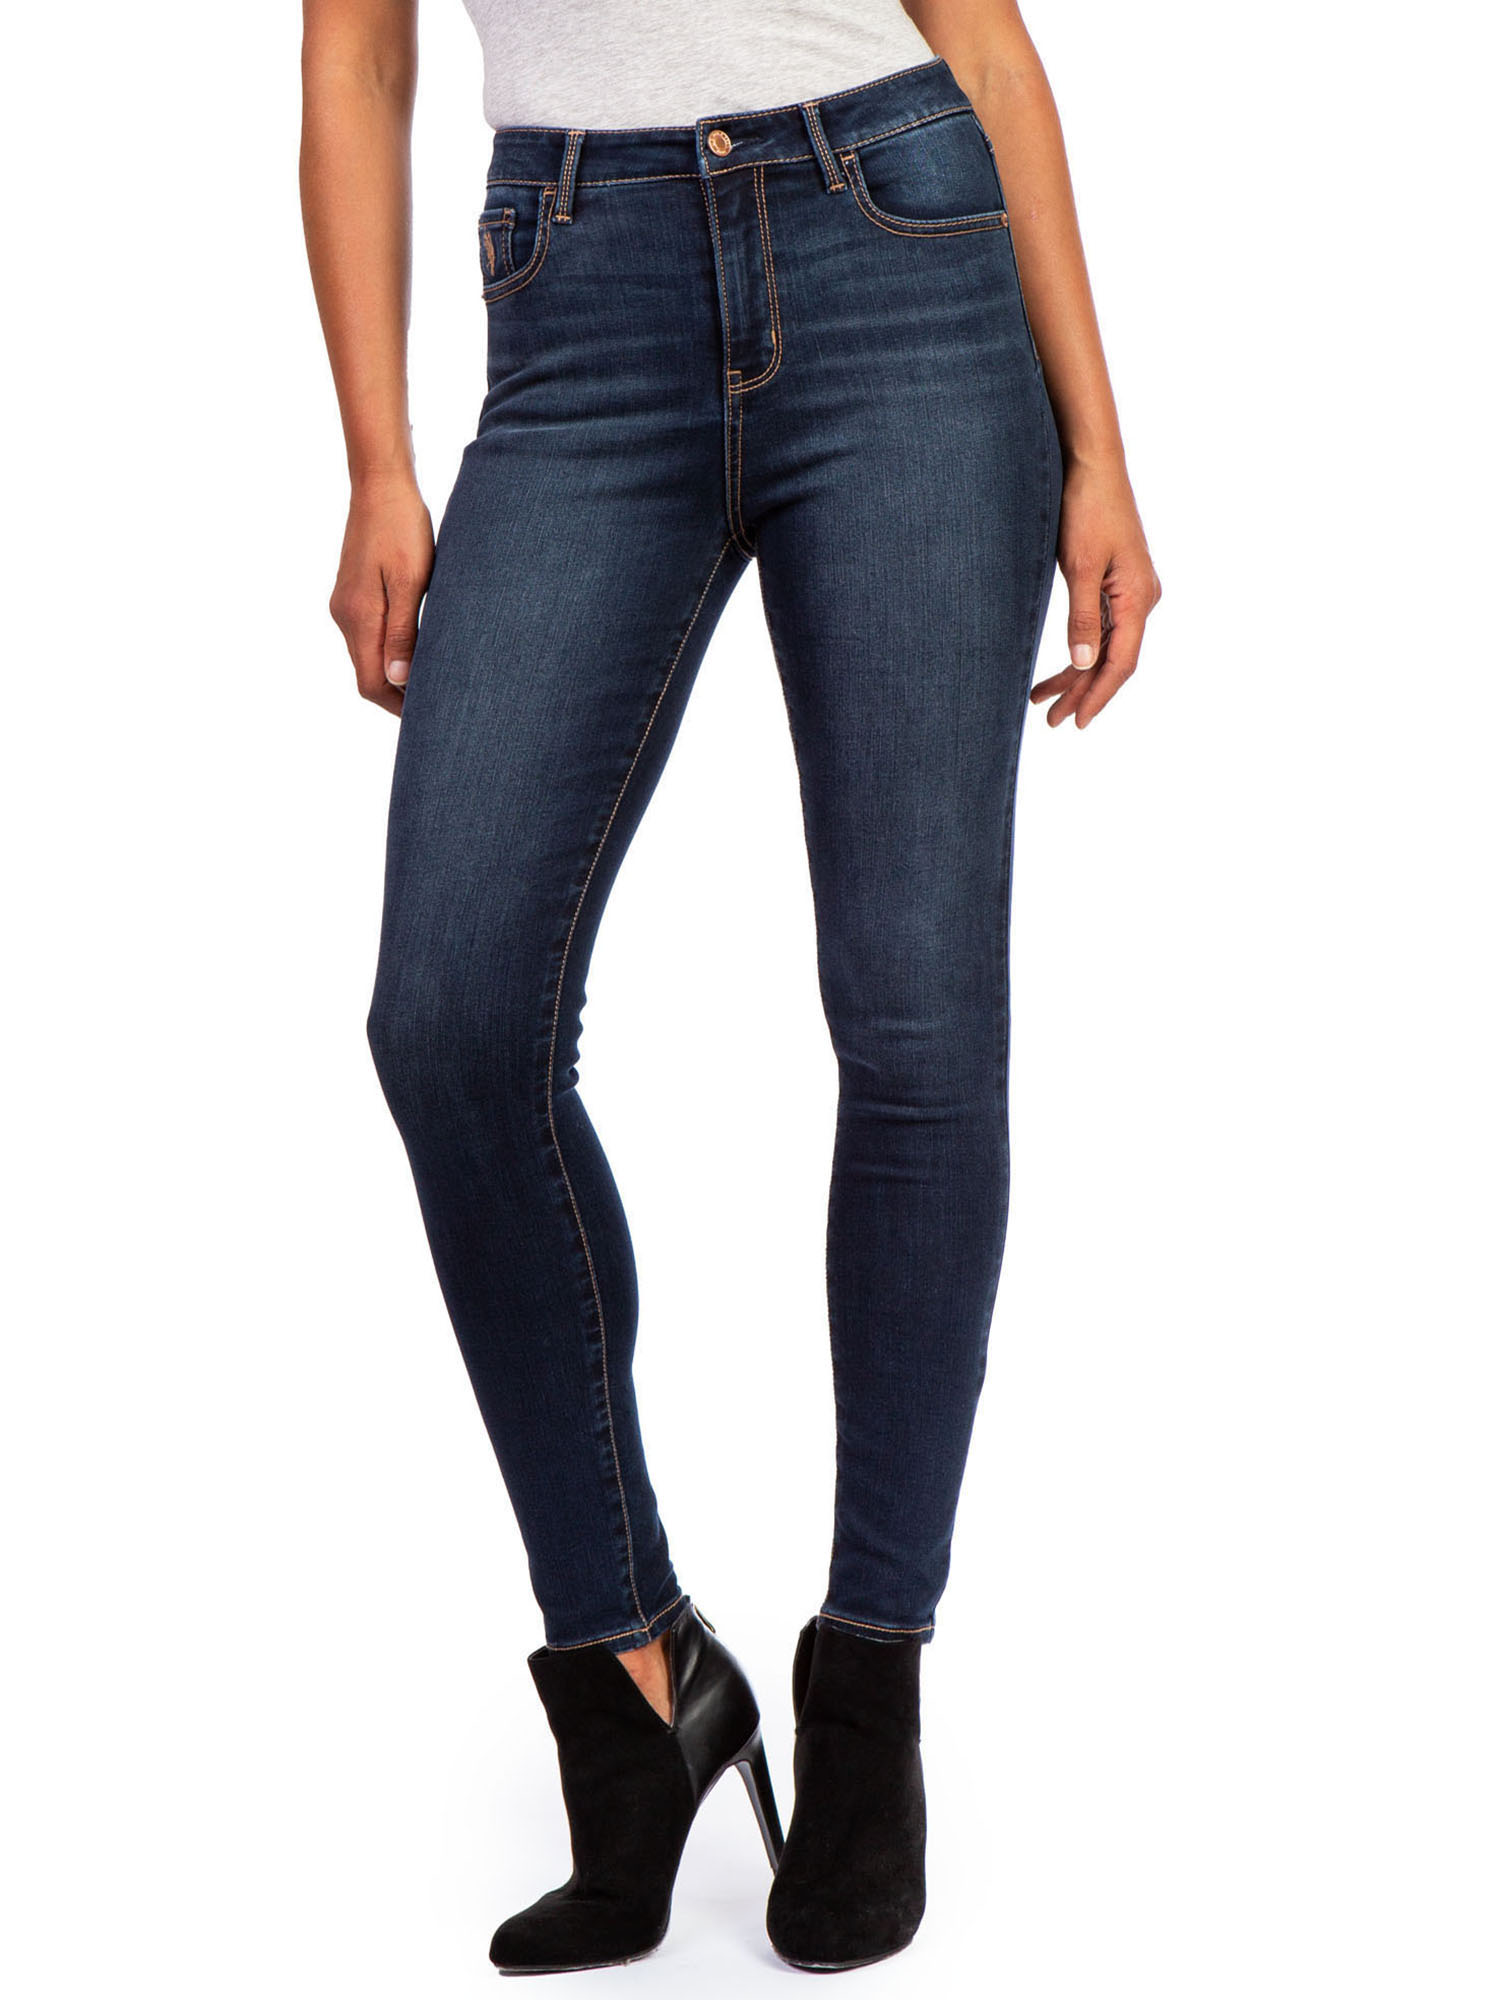 U.S. Polo Assn. High Rise Super Skinny Women's - image 1 of 5